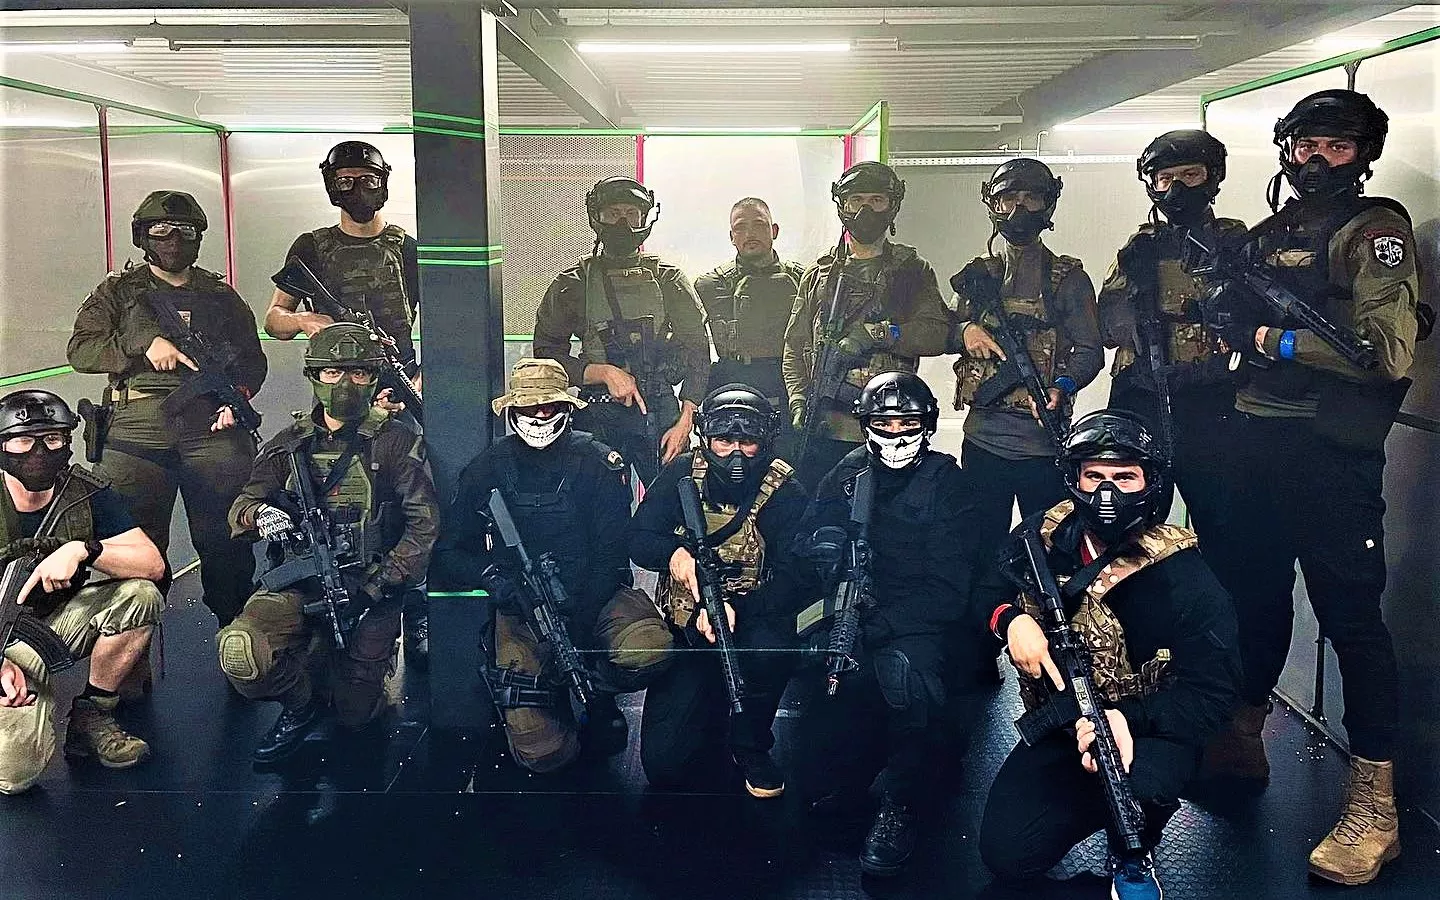 Airsoft Arena in Switzerland, Europe | Airsoft - Rated 1